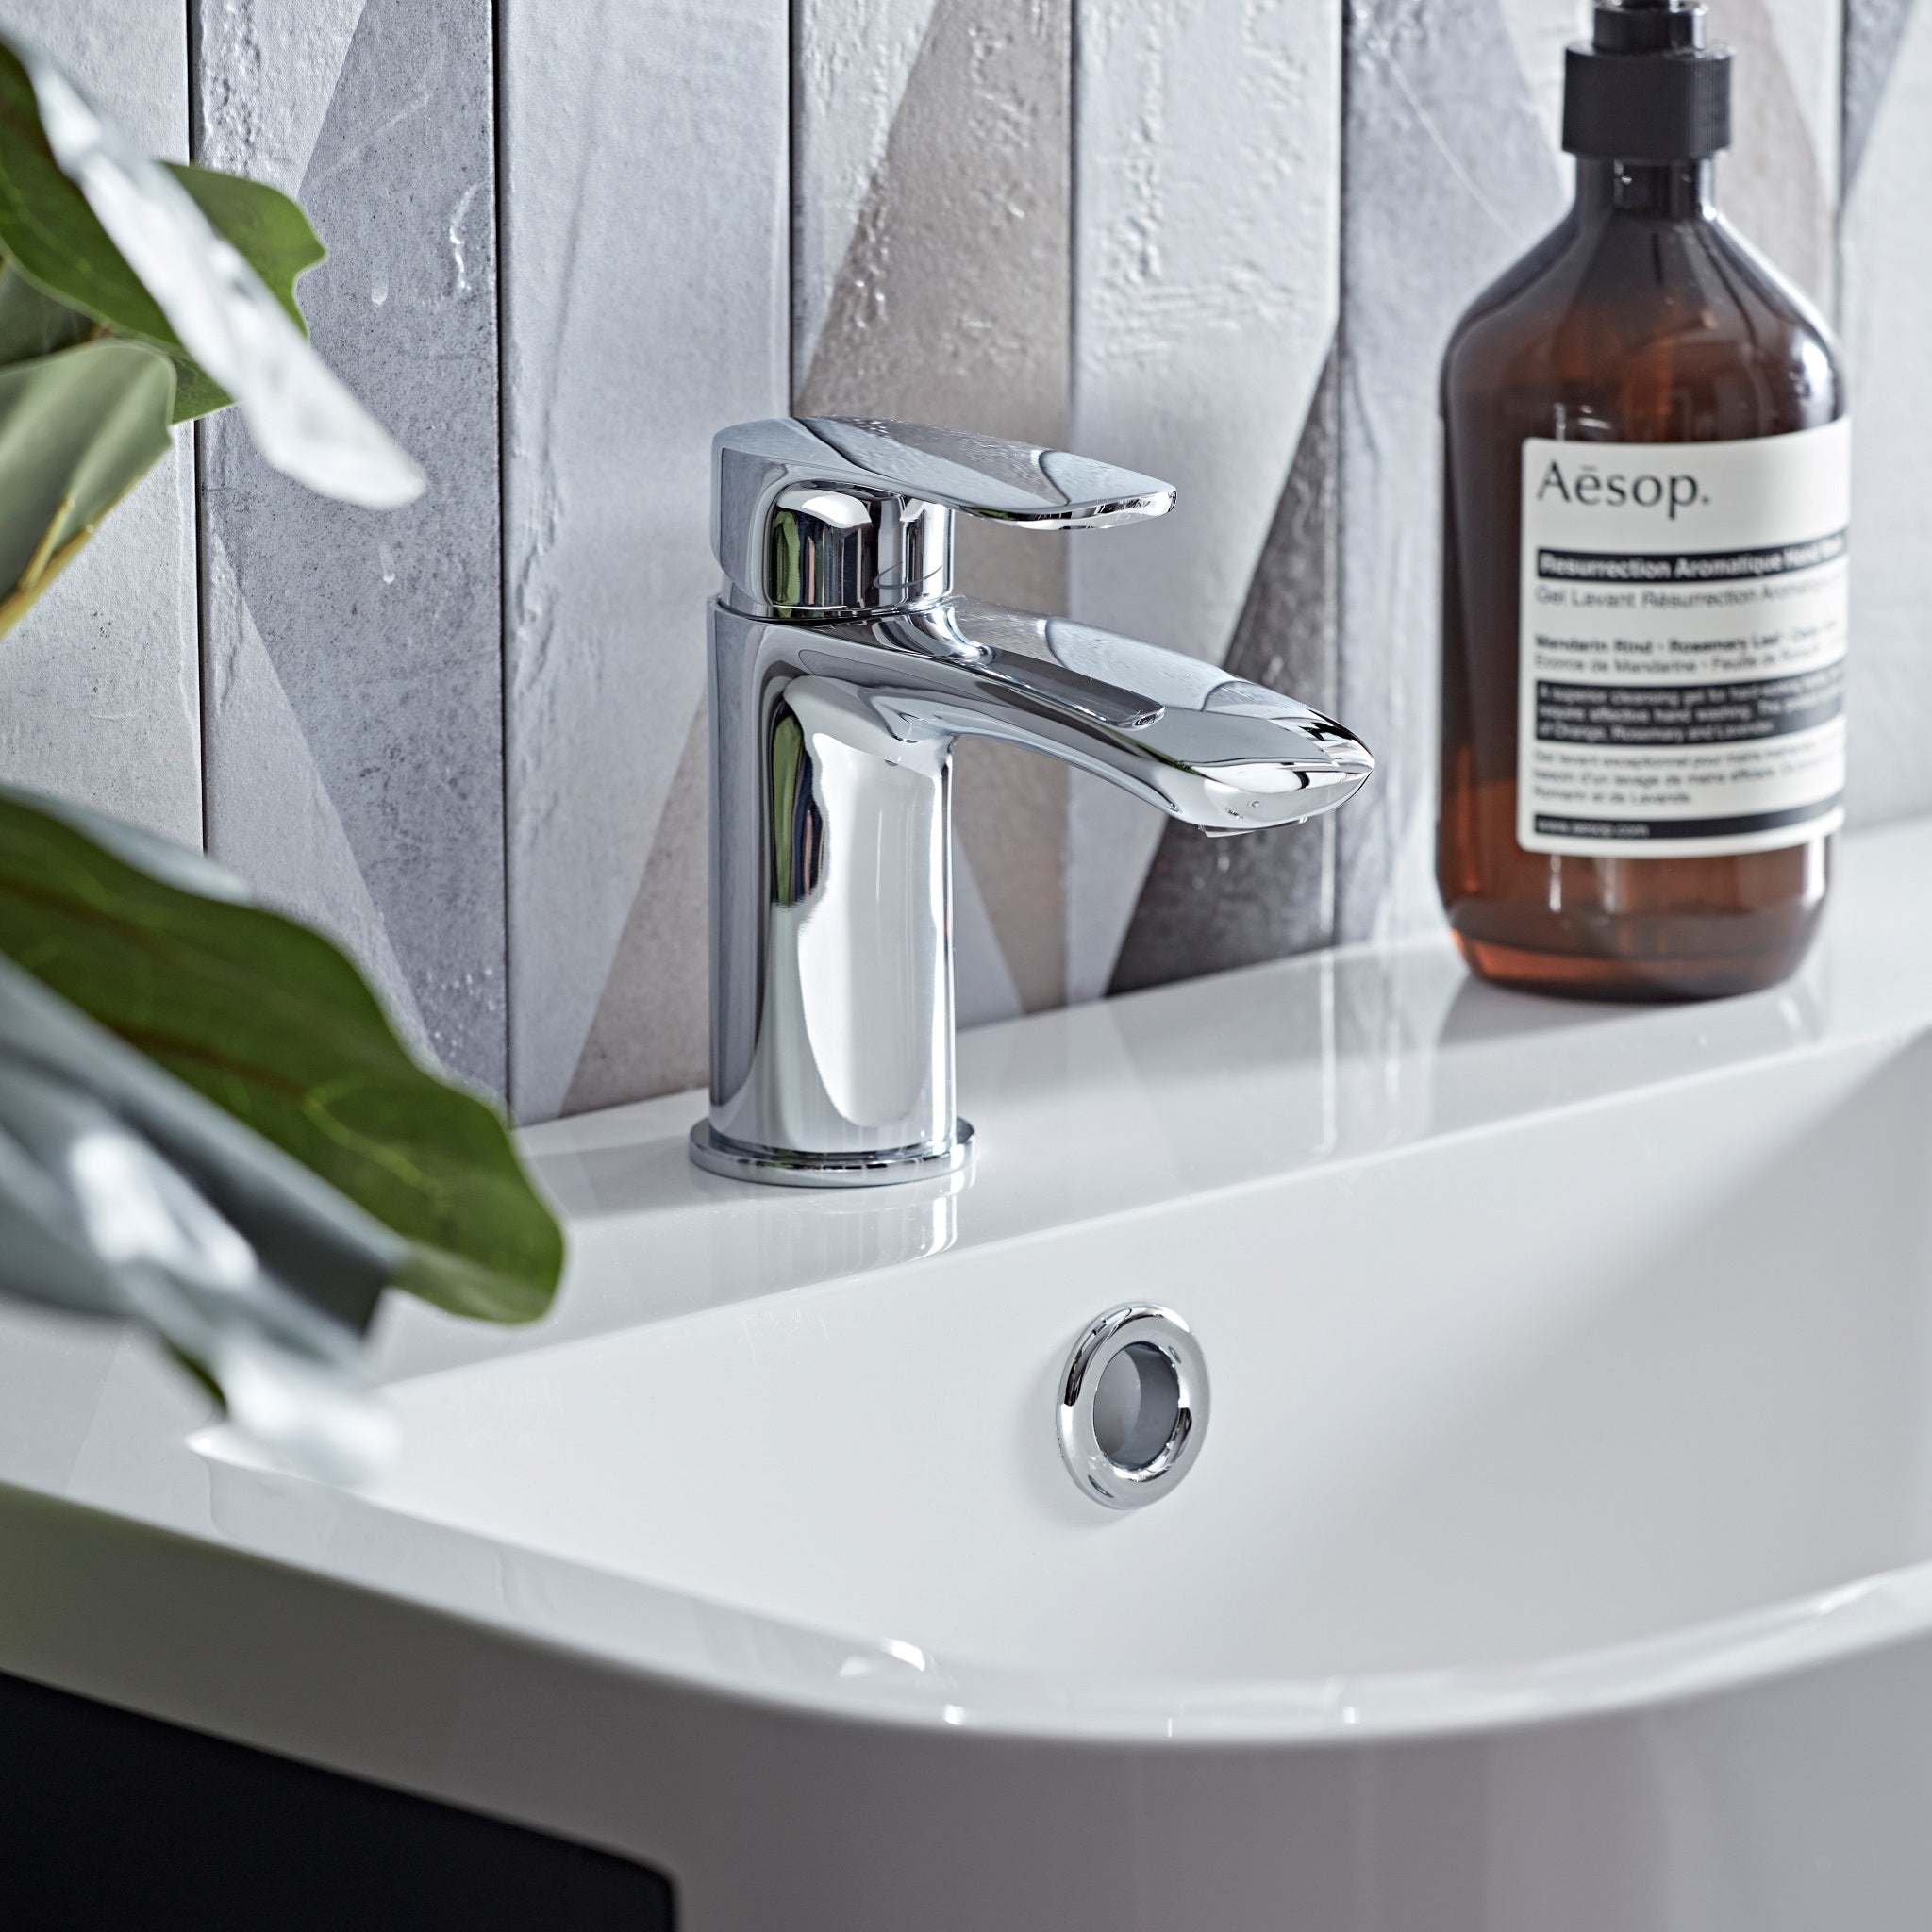 Tavistock Avid Basin Mixer With Click Waste in front of wood design with bottle on basin TAV11